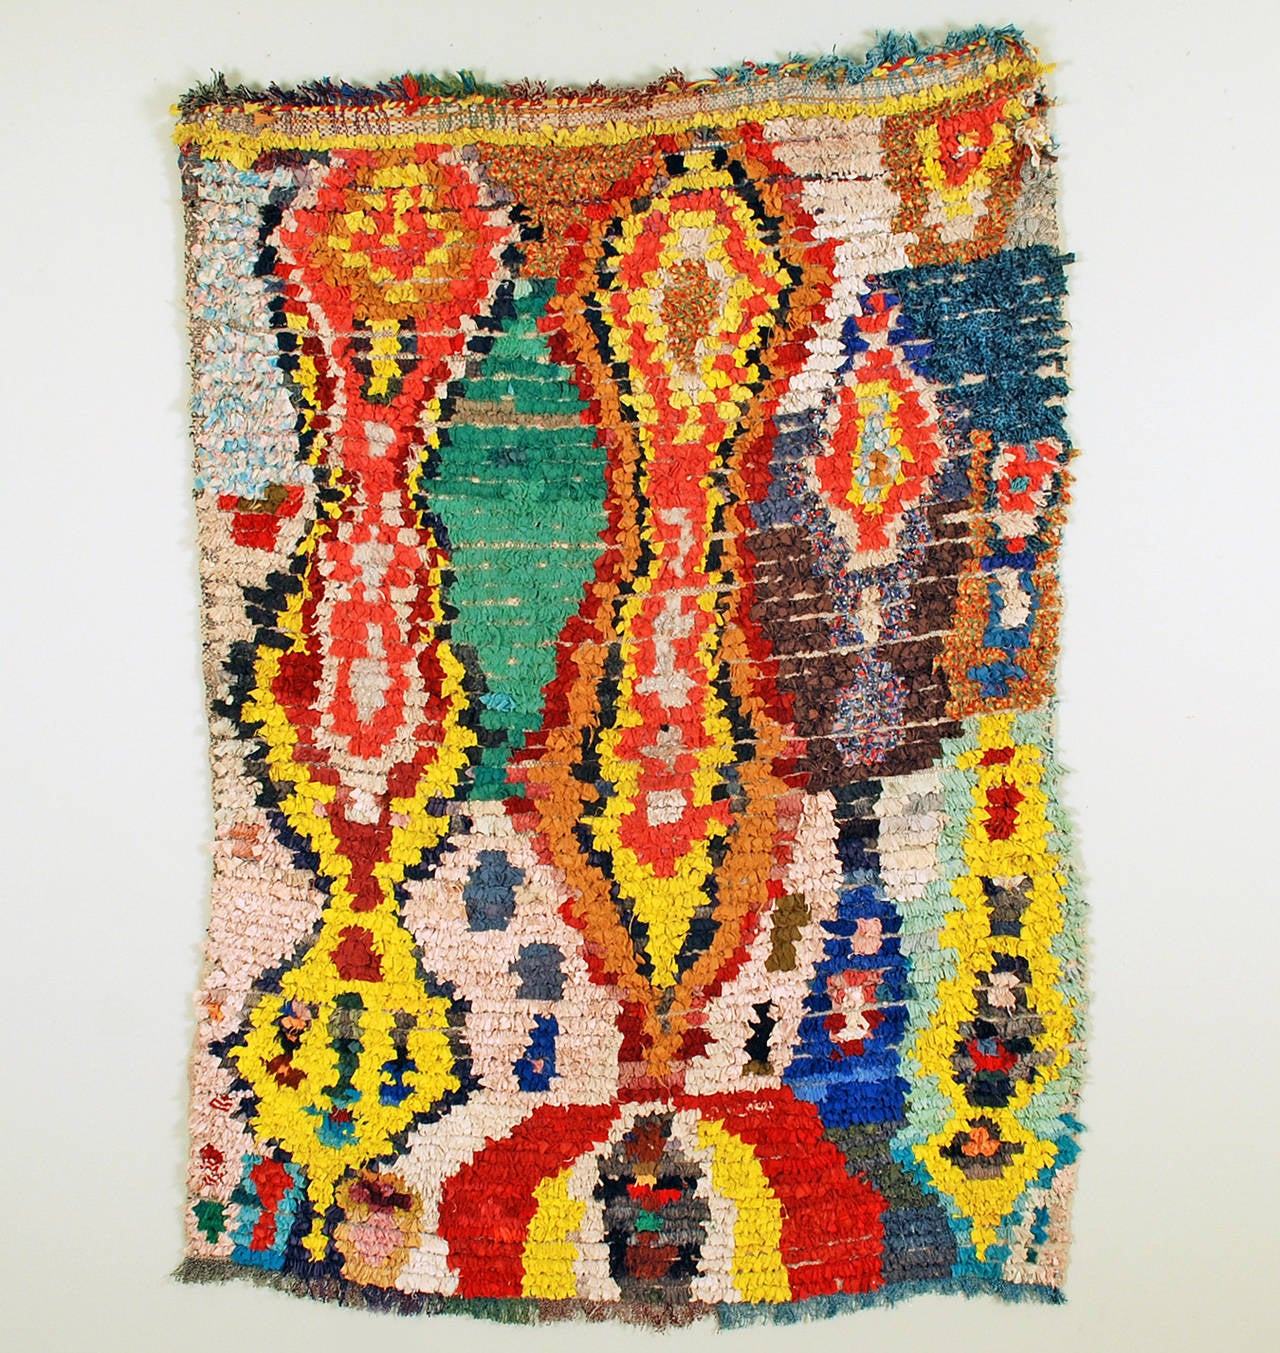 A stunning Moroccan 'rag rug', also known as 'boucherouite', from the higher Middle and High Atlas mountain regions. Berber - circa 1990 - 2000.

*Exhibited and featured in 'Post Punk Pink' with full color illustration.

The boucherouite is the